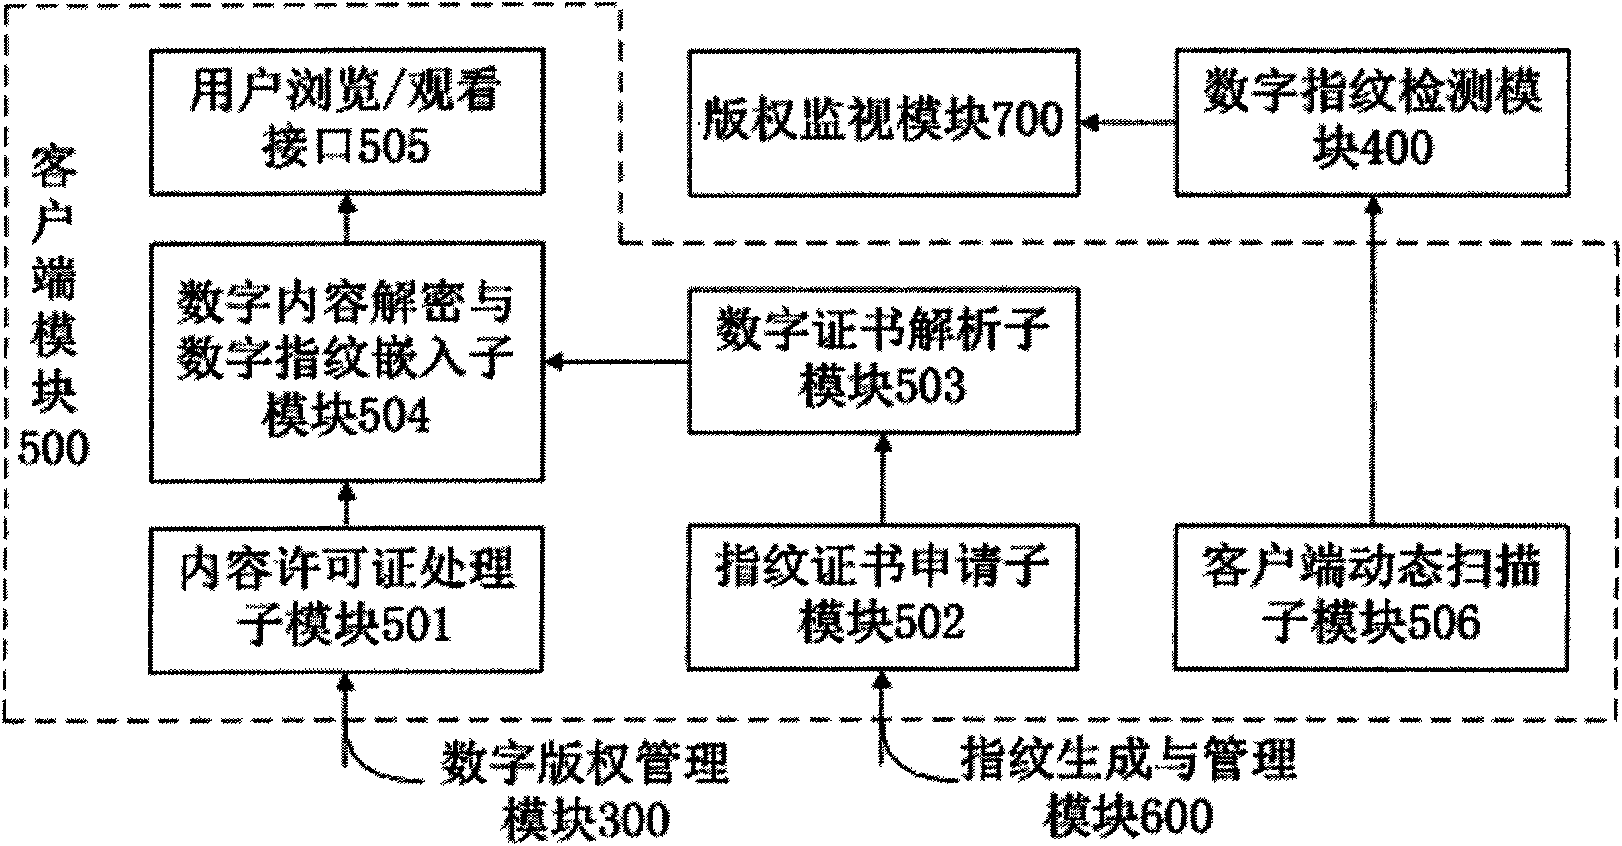 Network multimedia copyright active following and monitoring system